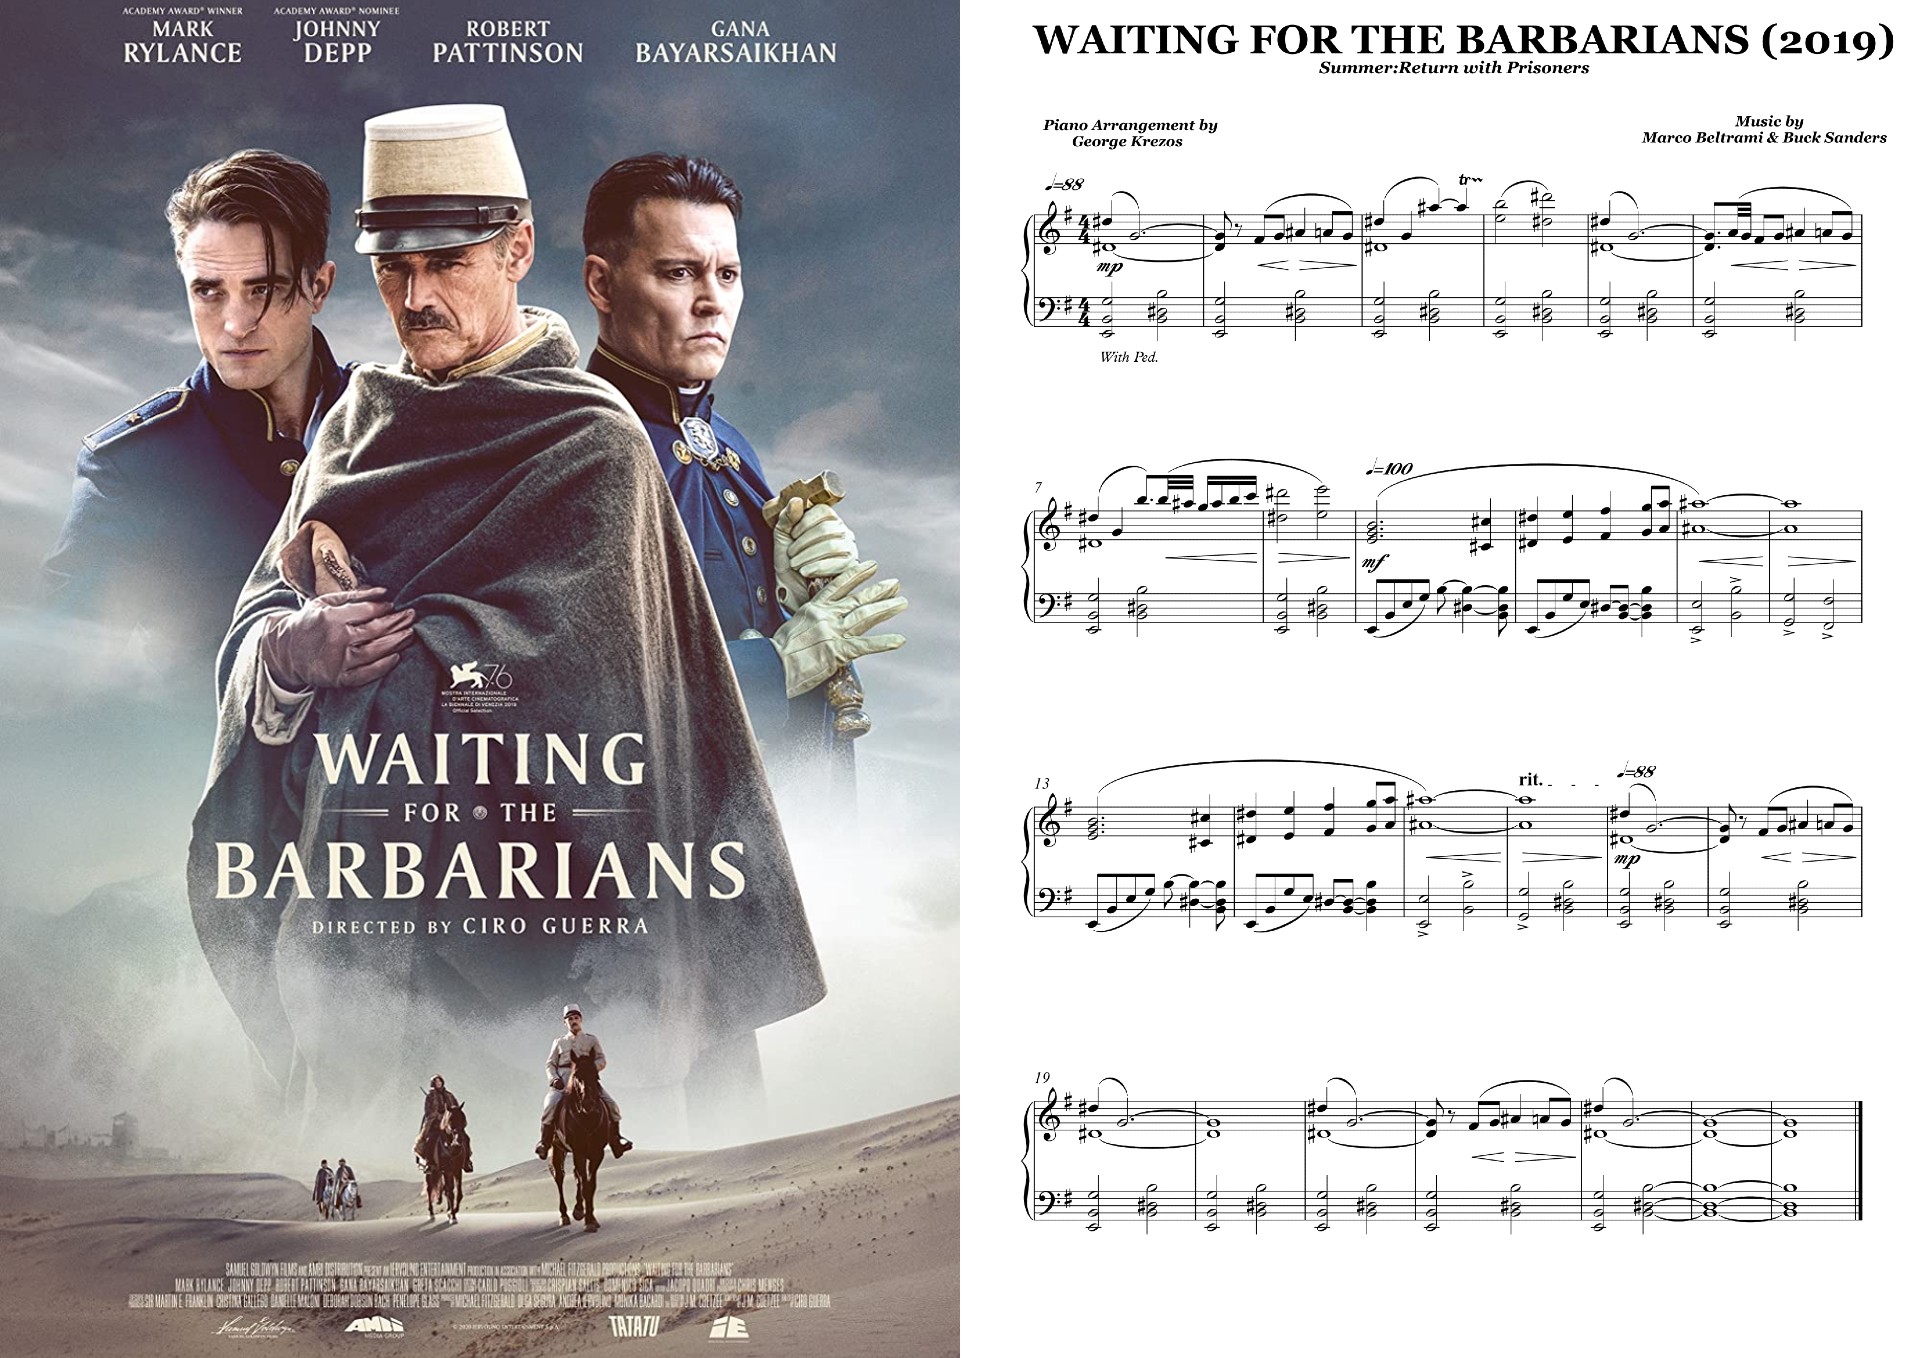 Waiting for the Barbarians - Return with Prisoners.jpg